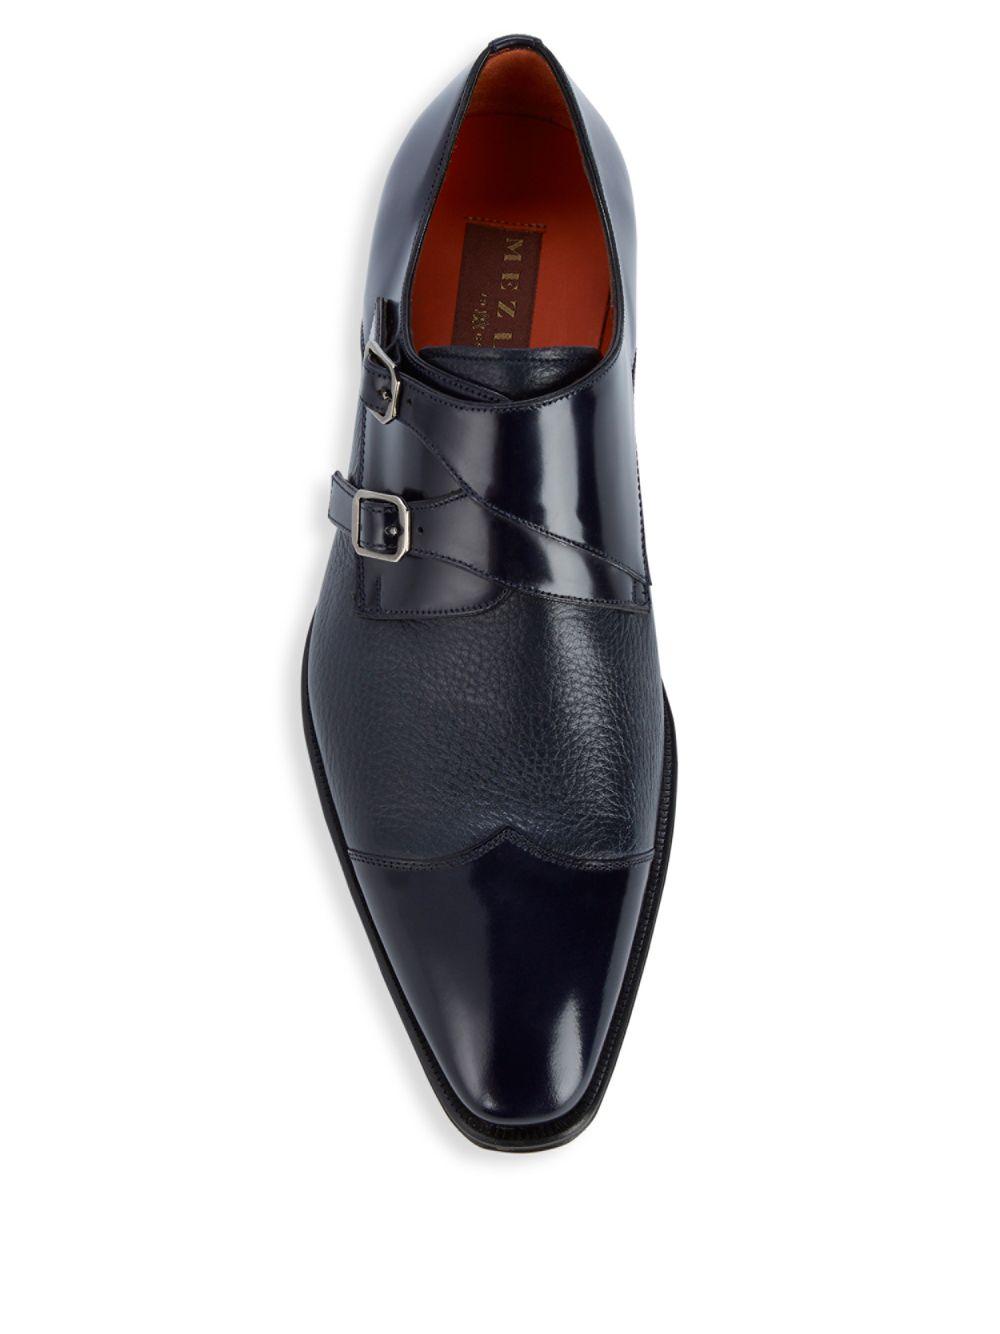 Mezlan Textured Leather Double Monk-strap Dress Shoes in Dark Blue ...